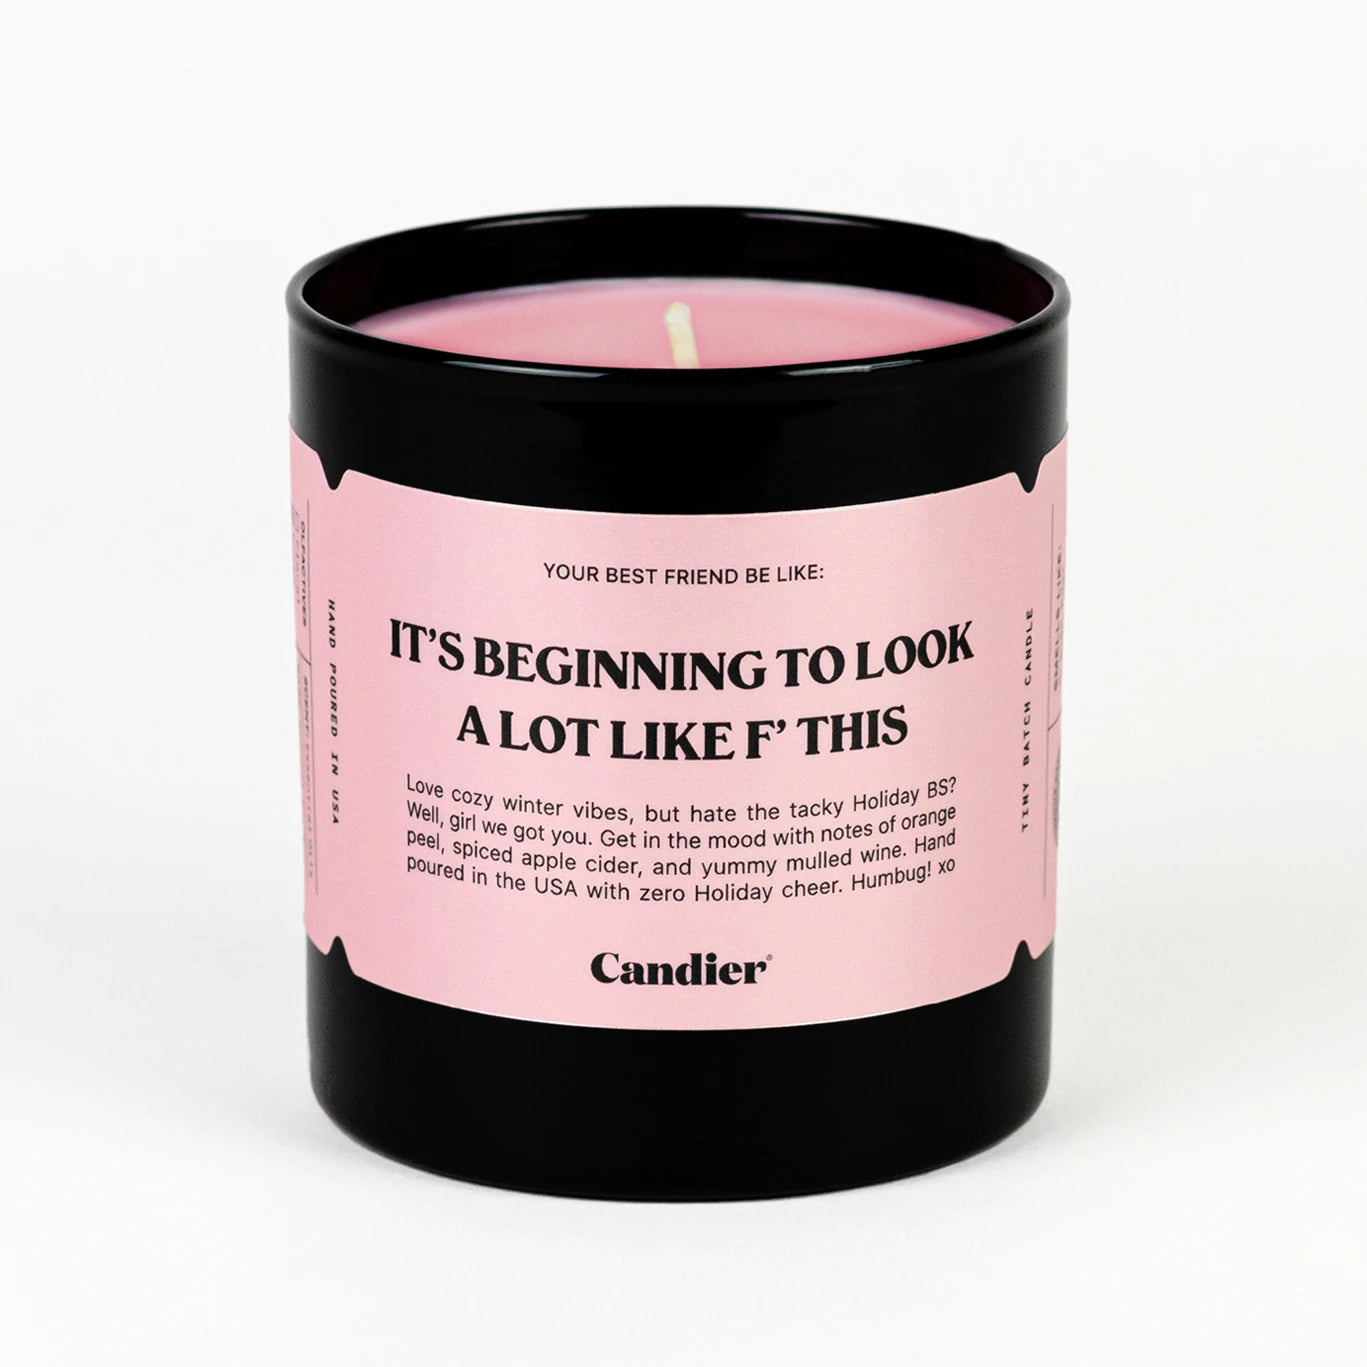 F* THIS CANDLE